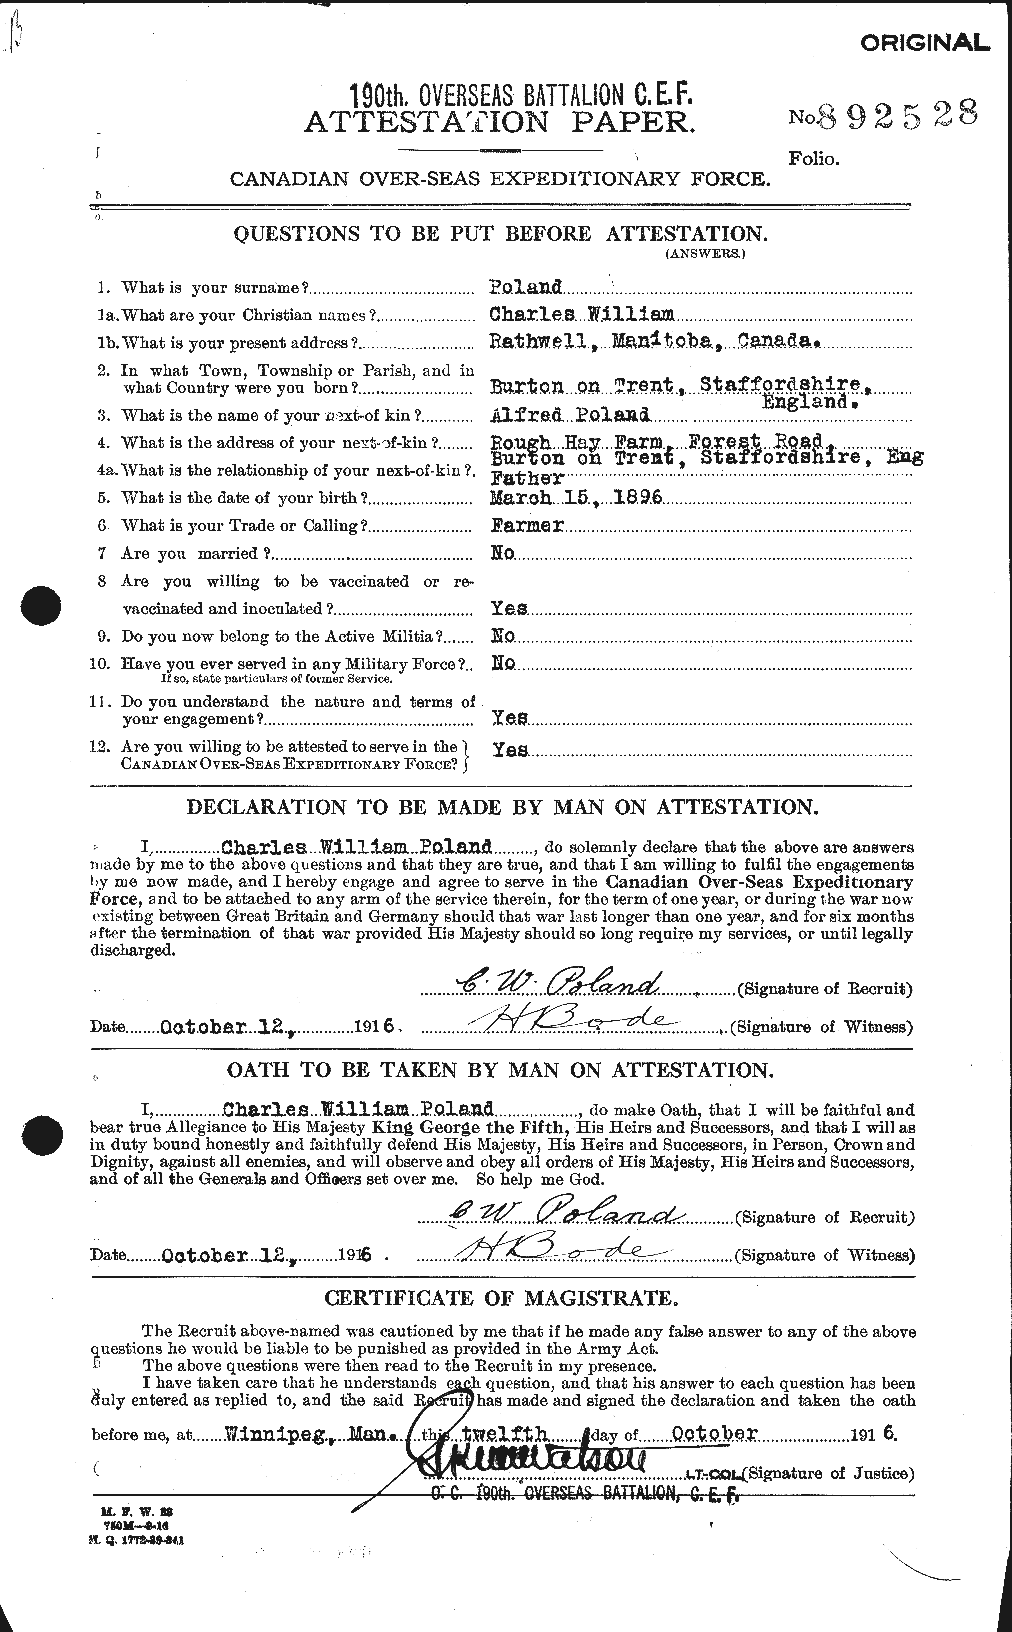 Personnel Records of the First World War - CEF 578489a